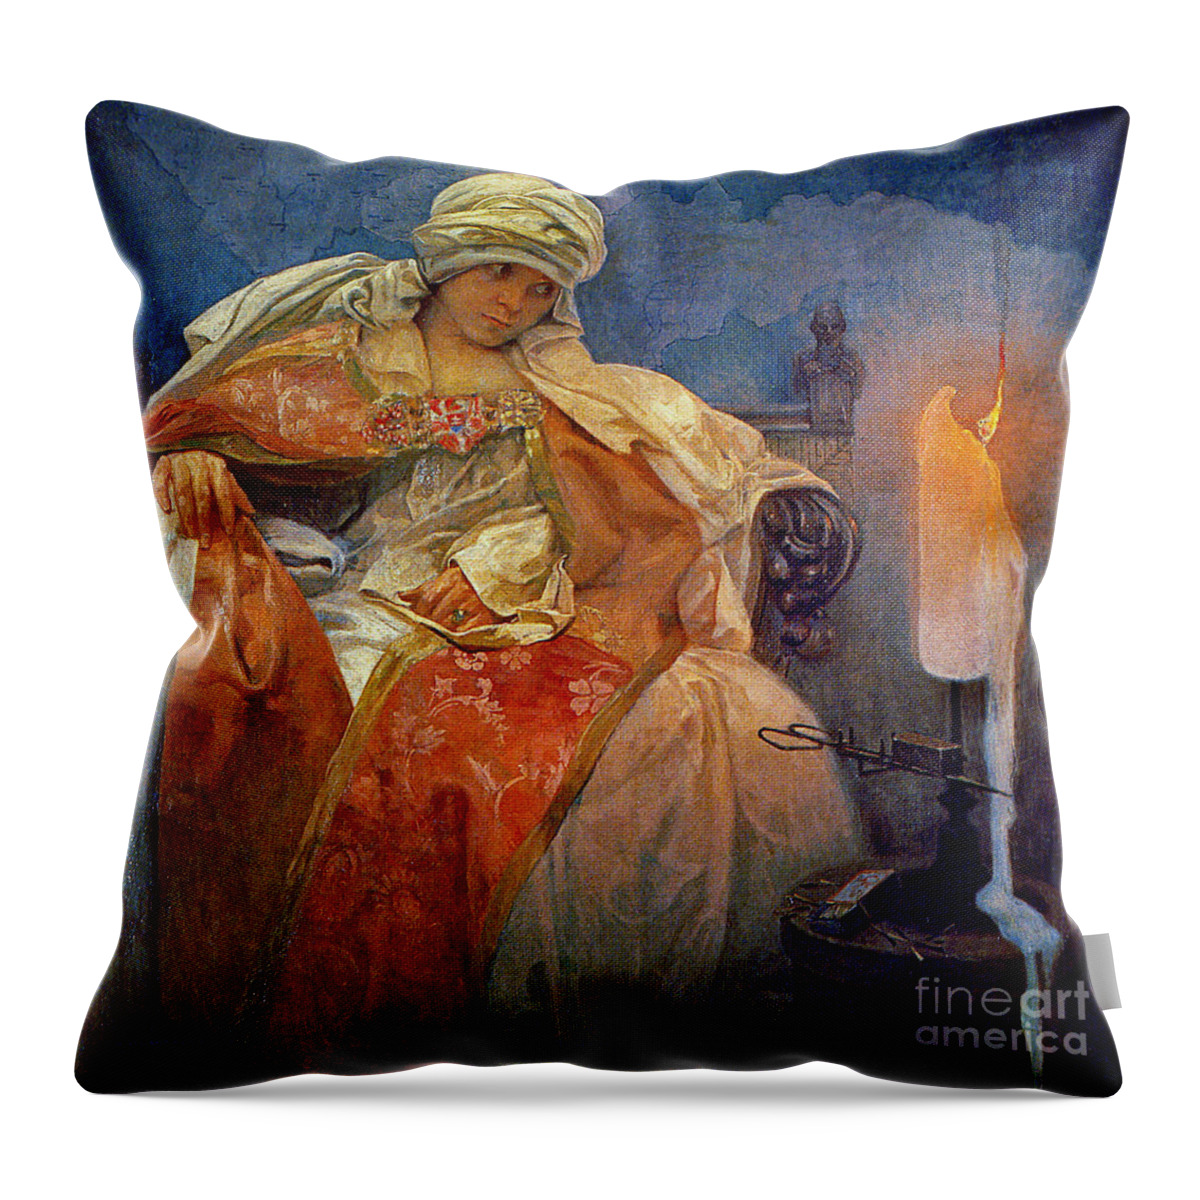 Candlelight 1911 Throw Pillow featuring the photograph Candlelight 1911 by Padre Art